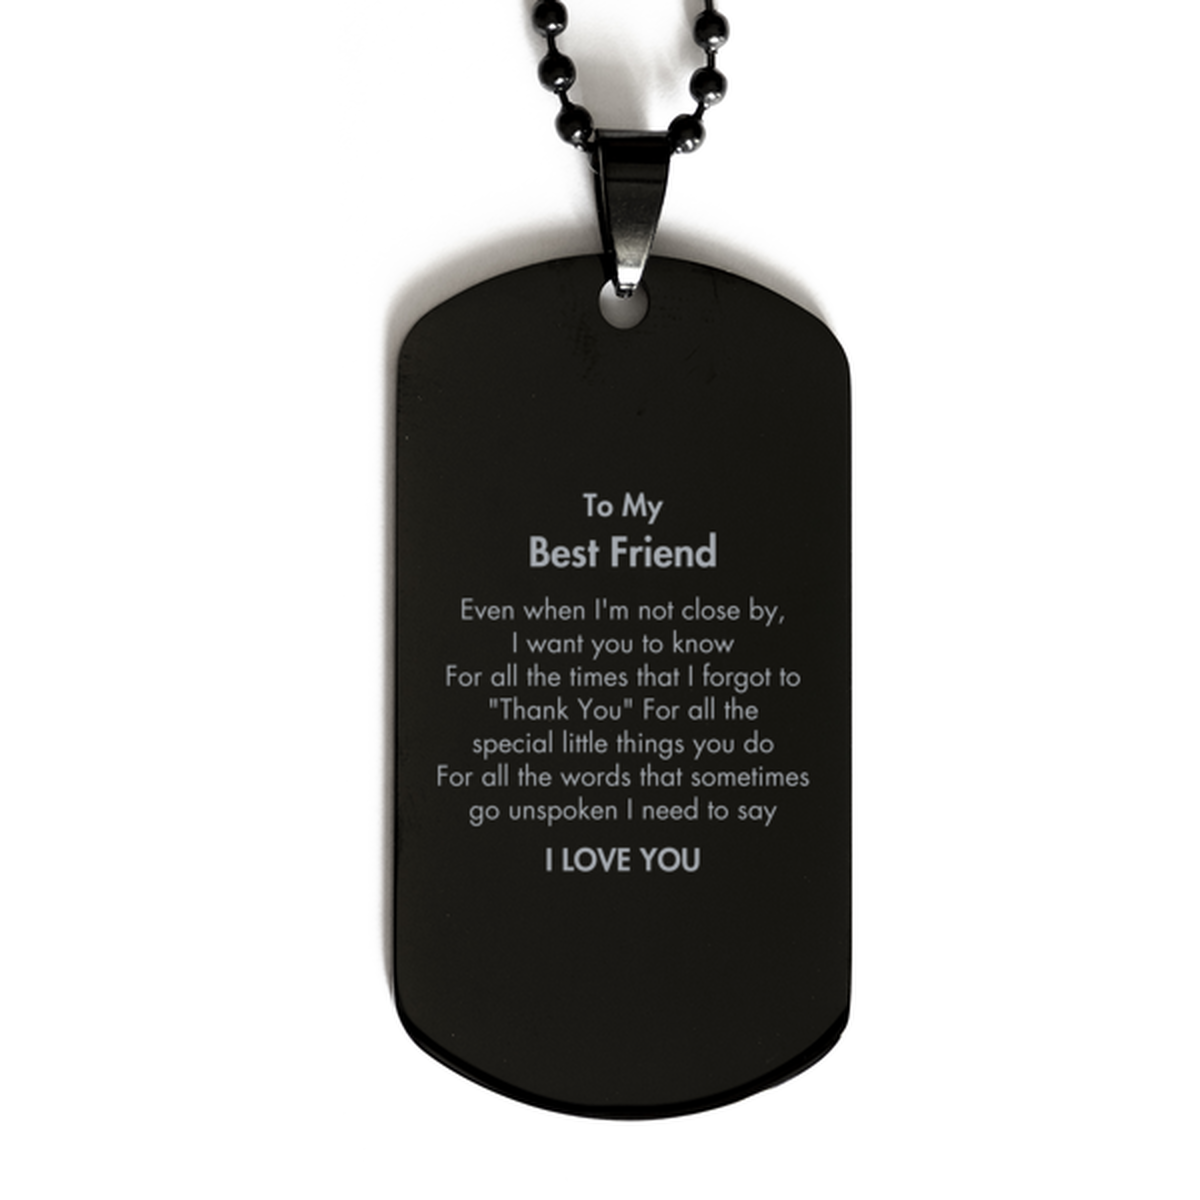 Thank You Gifts for Best Friend, Keepsake Black Dog Tag Gifts for Best Friend Birthday Mother's day Father's Day Best Friend For all the words That sometimes go unspoken I need to say I LOVE YOU